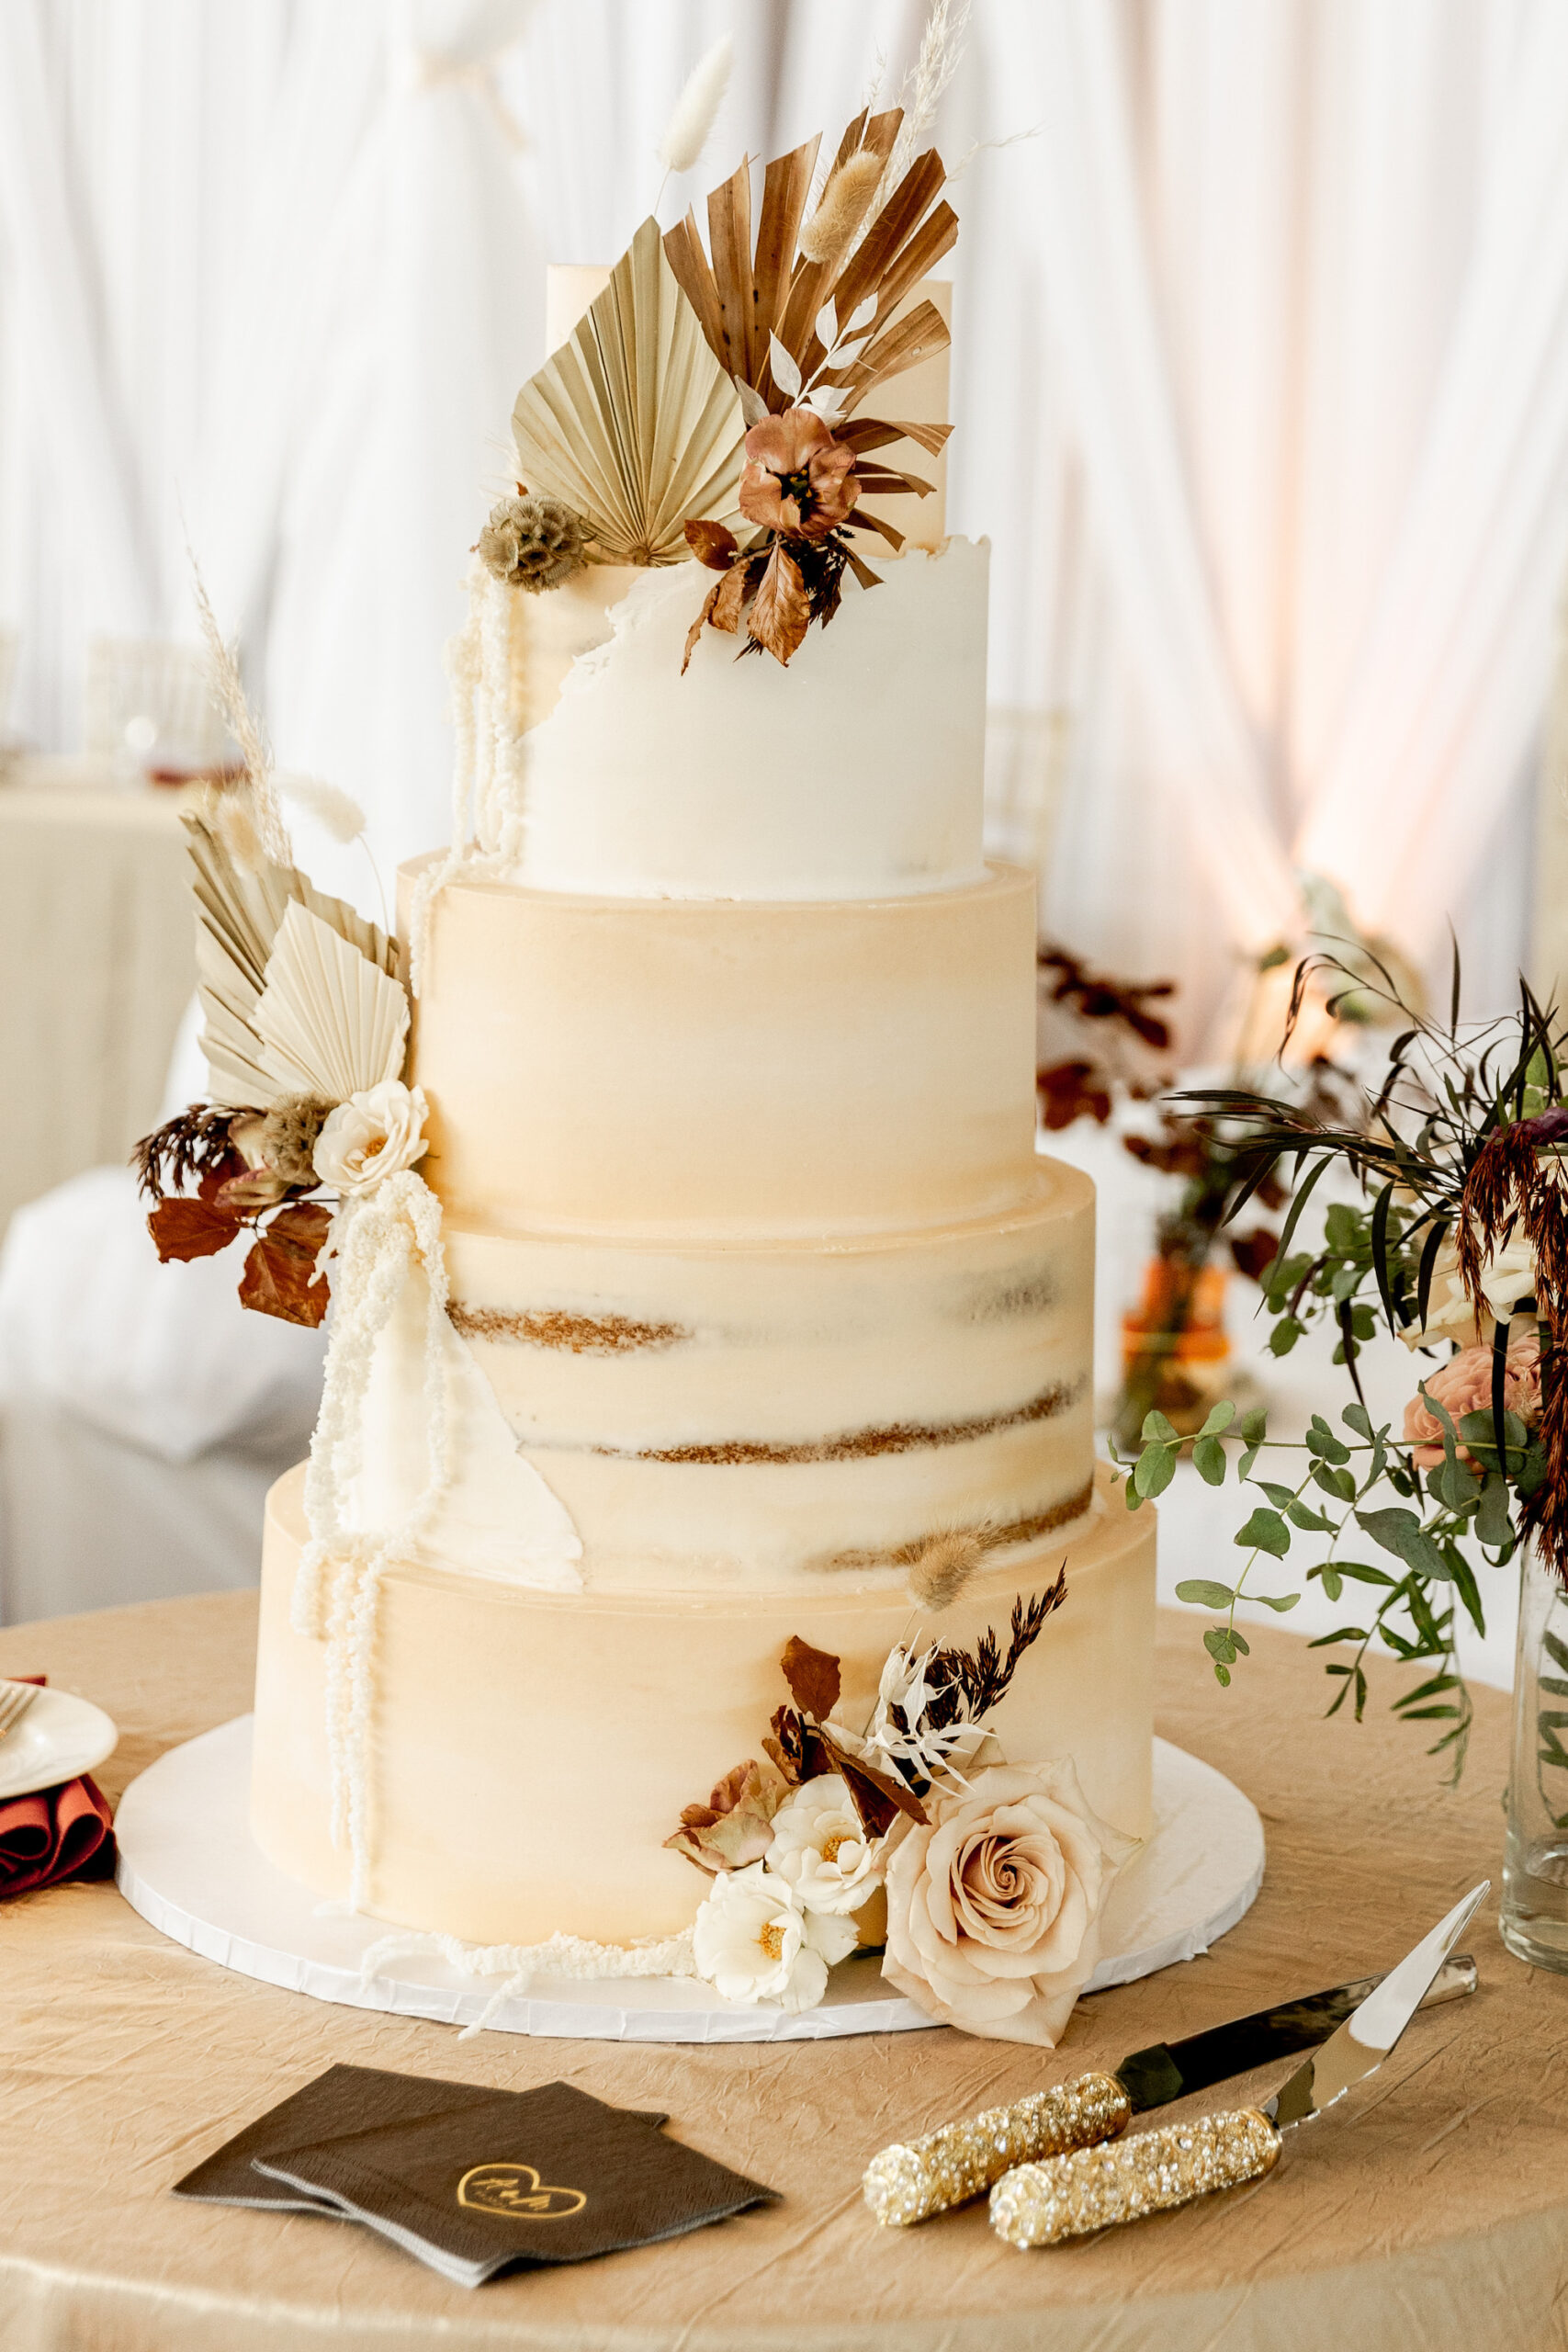 Fall Boho Wedding, Five Tier White Semi Naked Wedding Cake with Dried Leaves and Ivory Roses